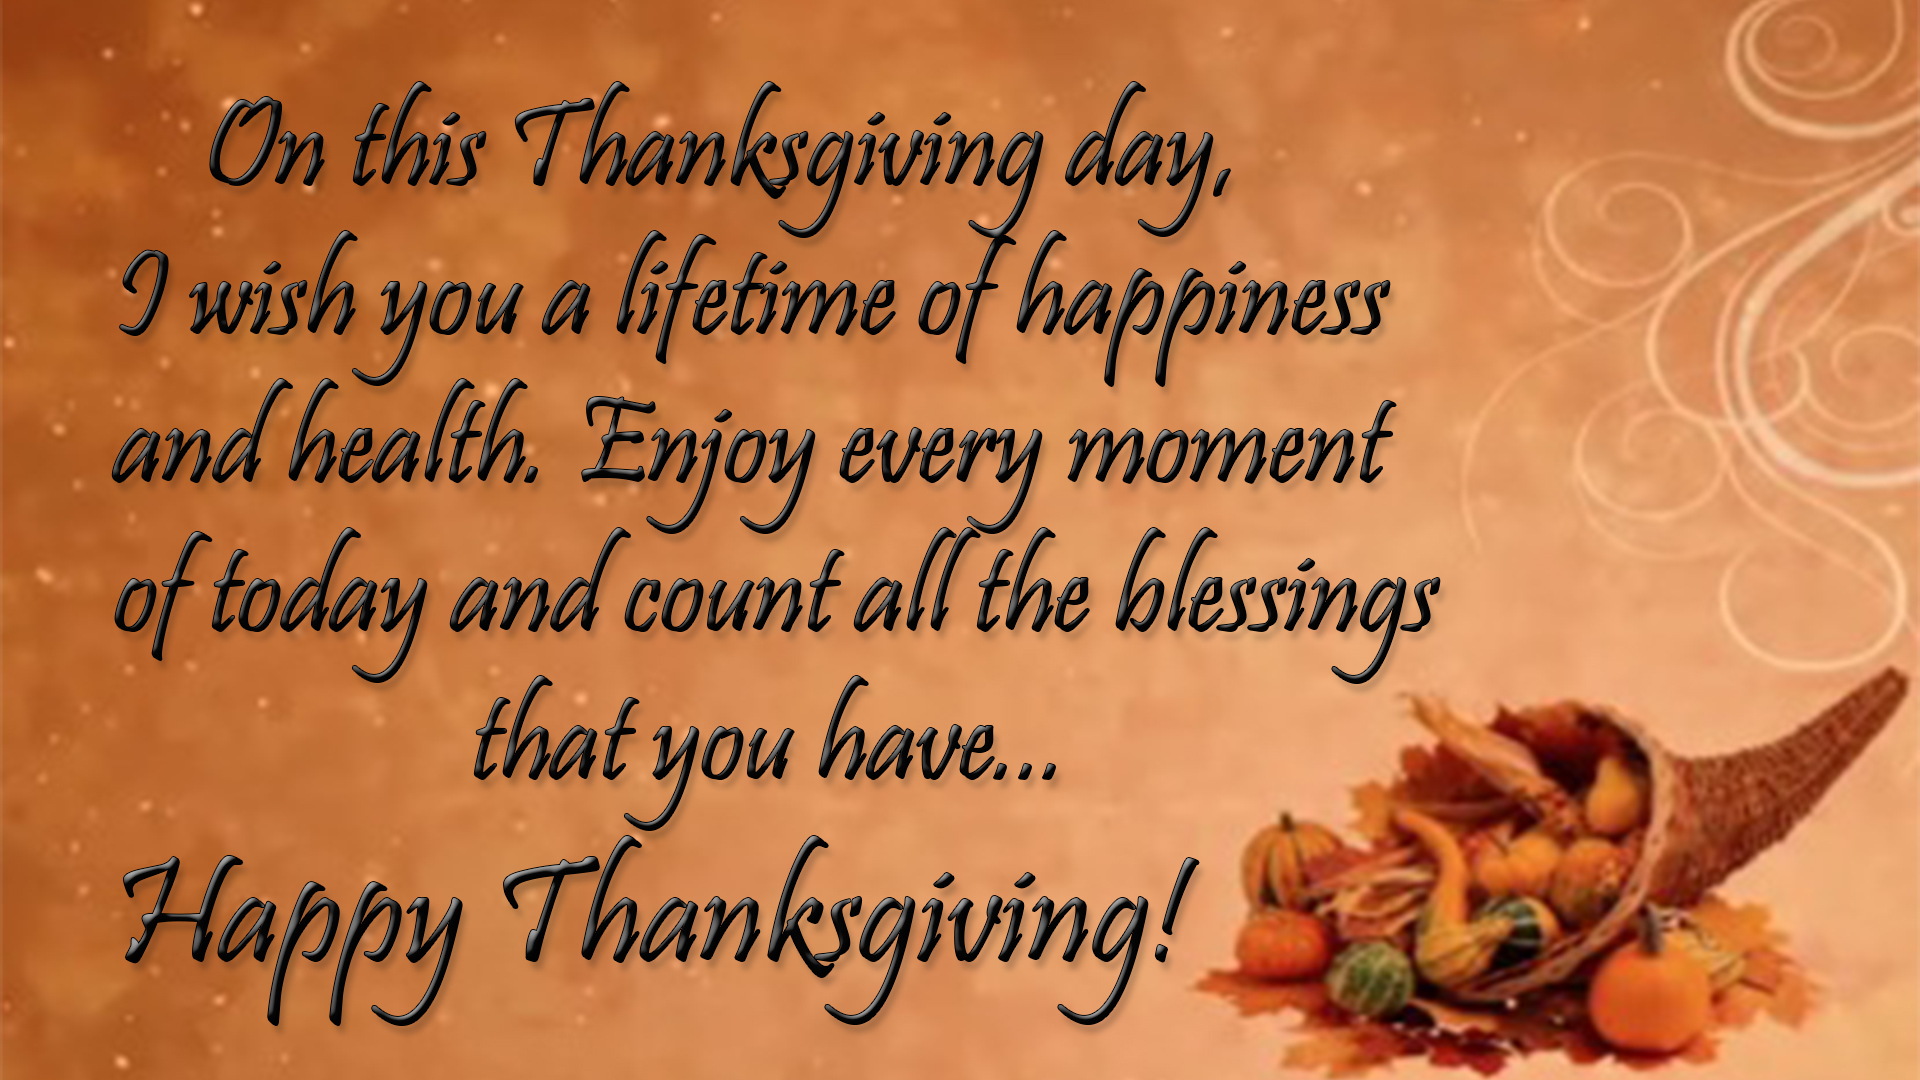 happy thanksgiving wishes hd image